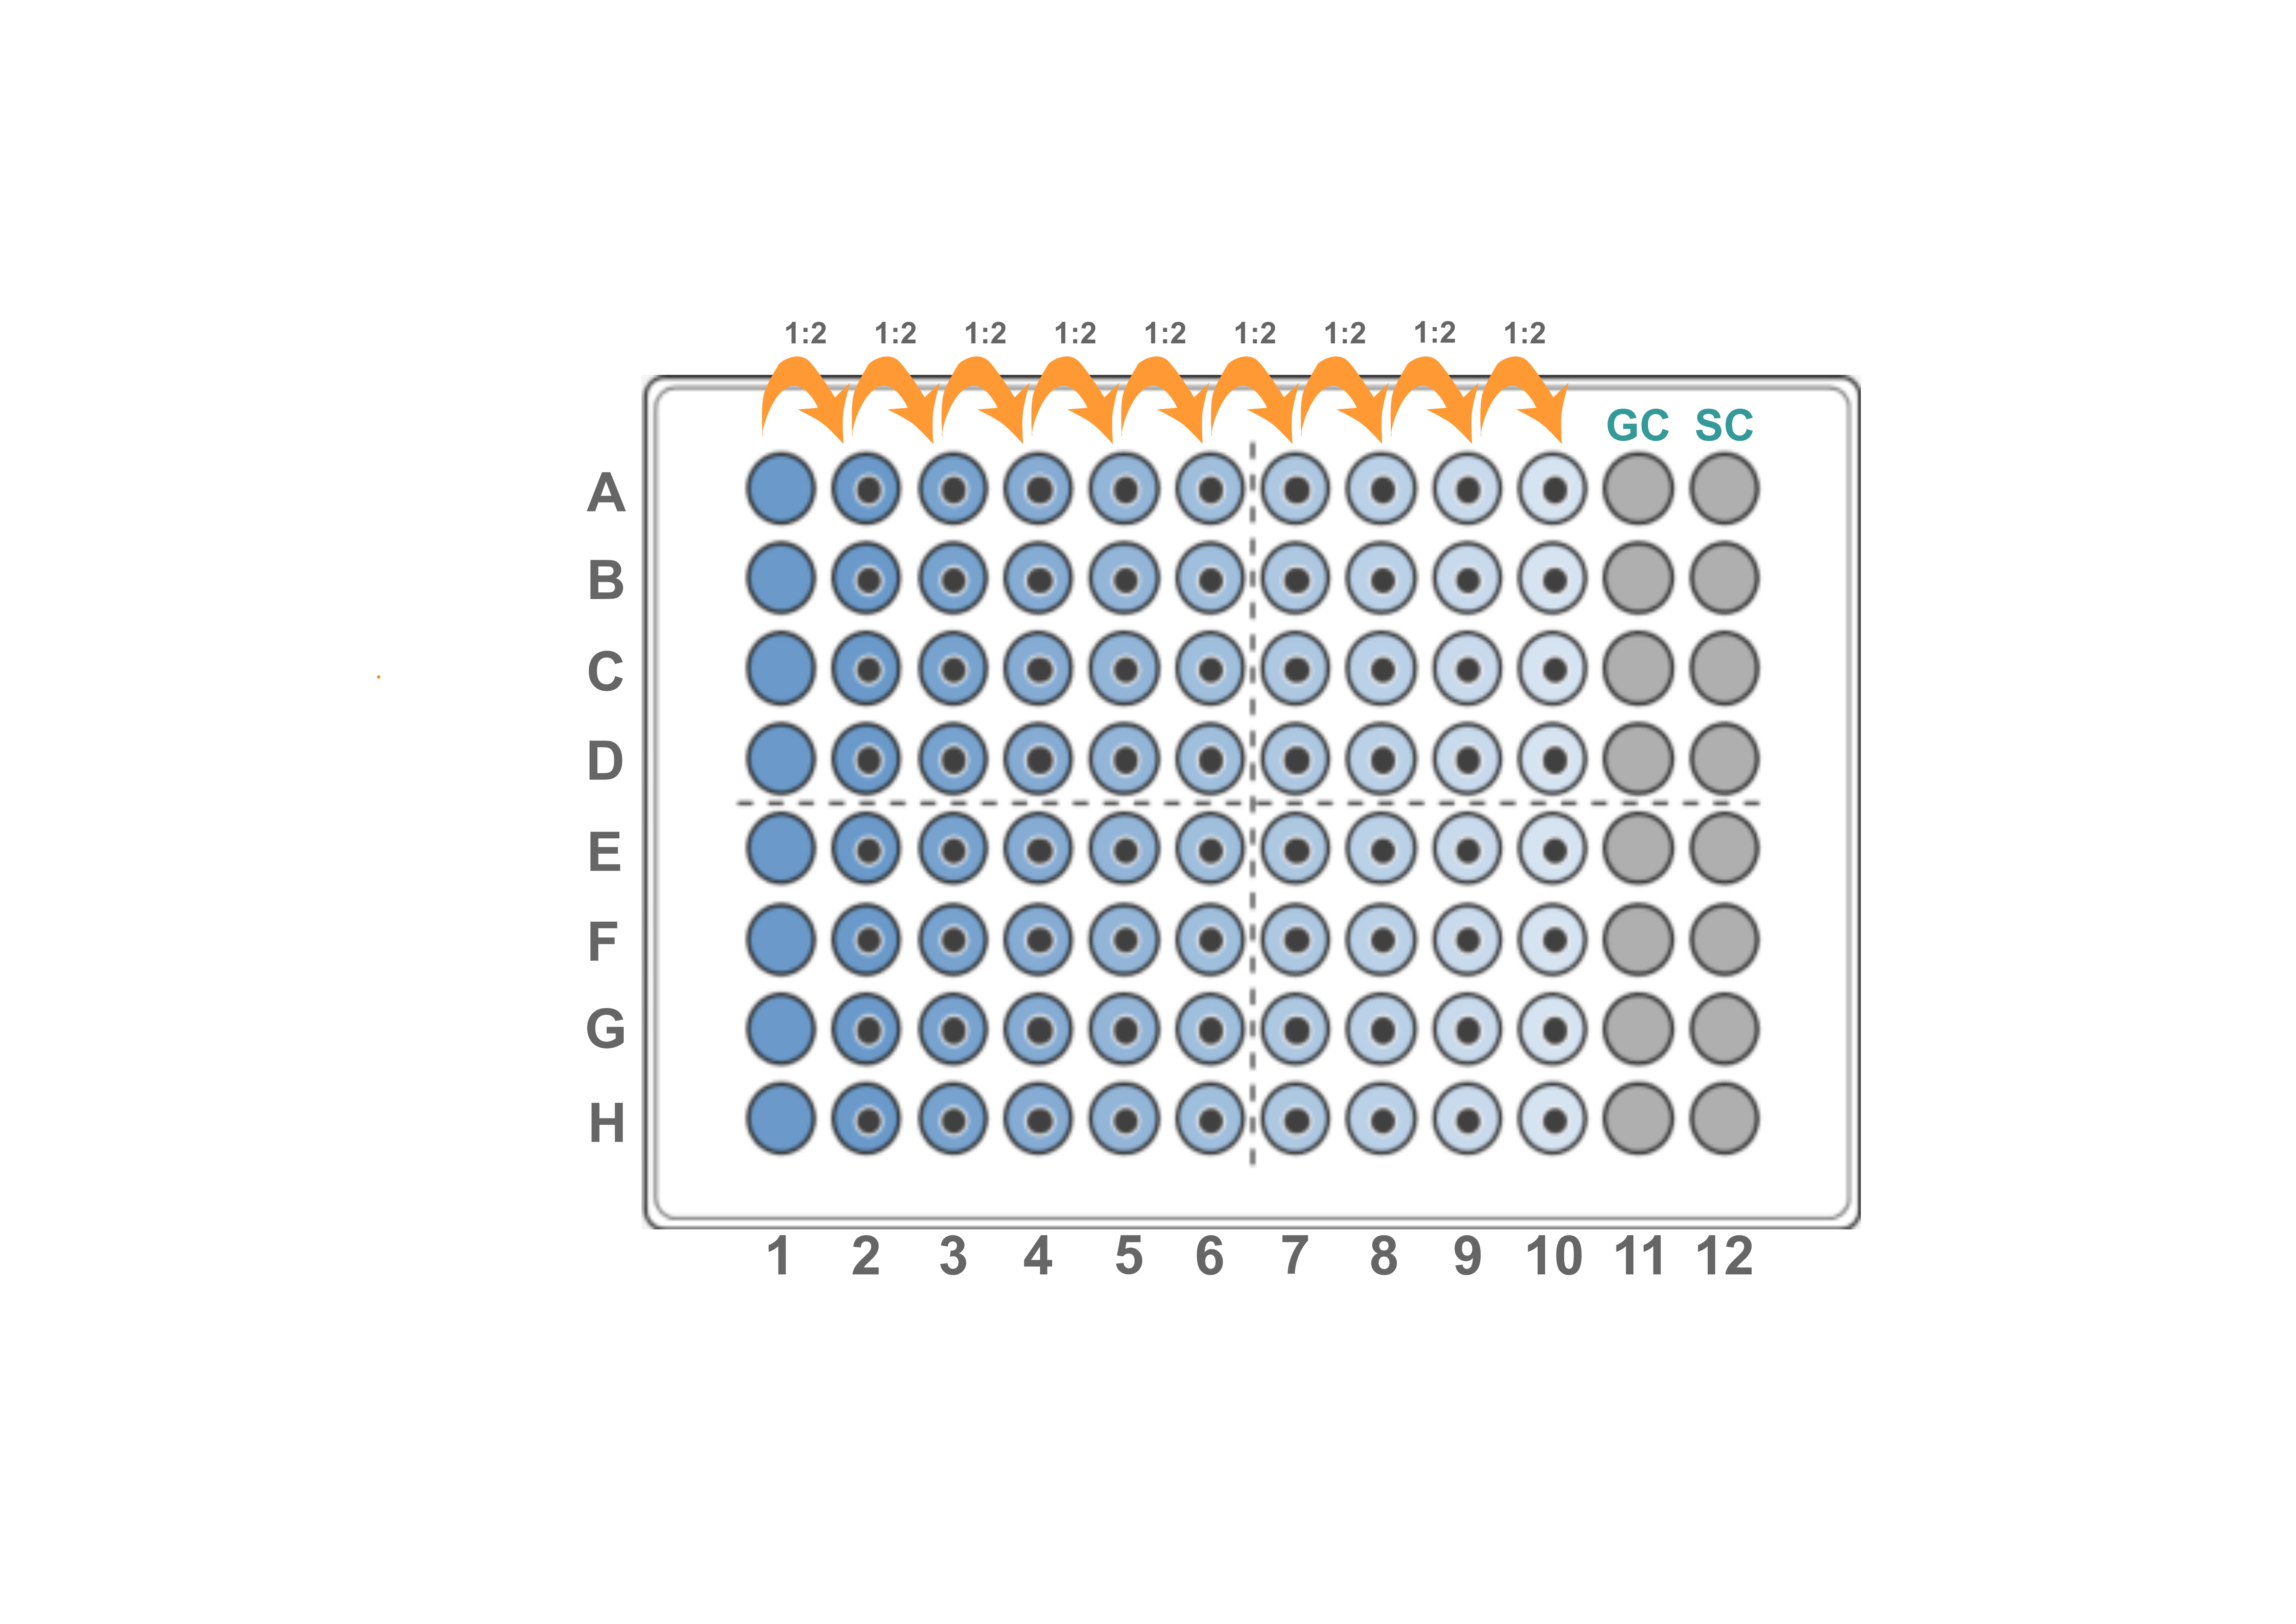 Schematic representation of the 10x twofold serial dilution (GC: growth control, SC: sterility control).